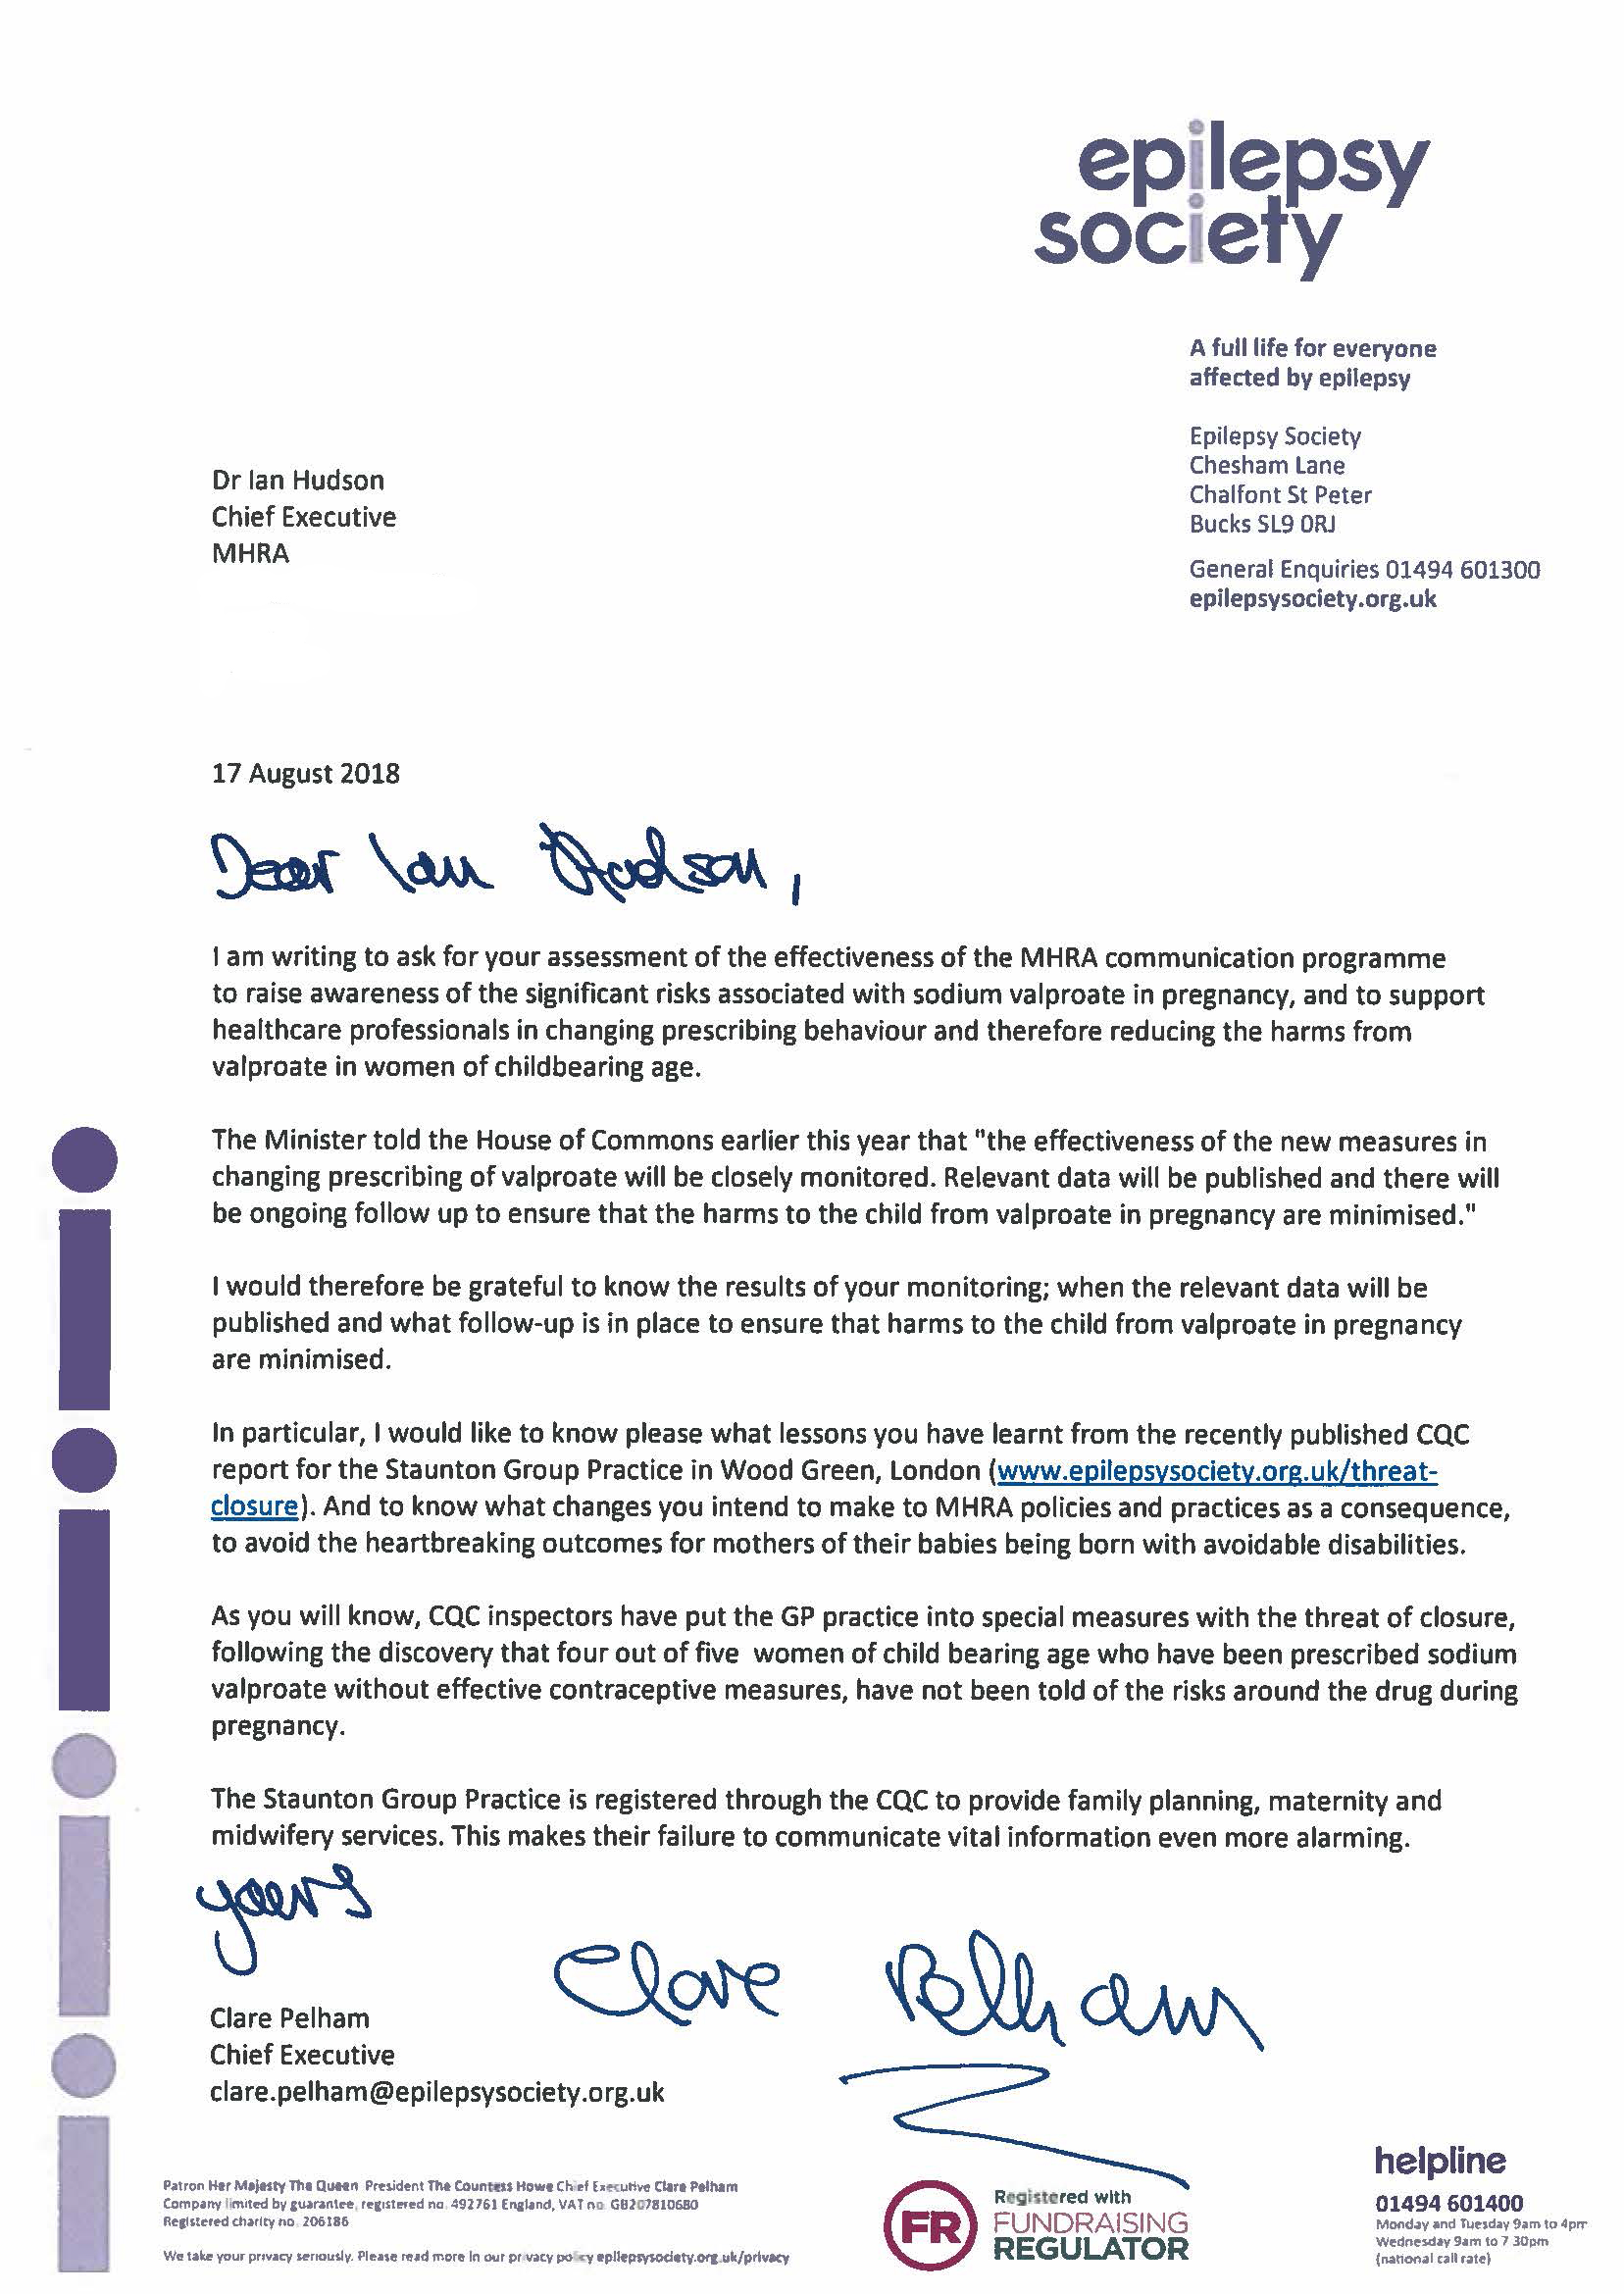 Letter to Dr Ian Hudson MHRA